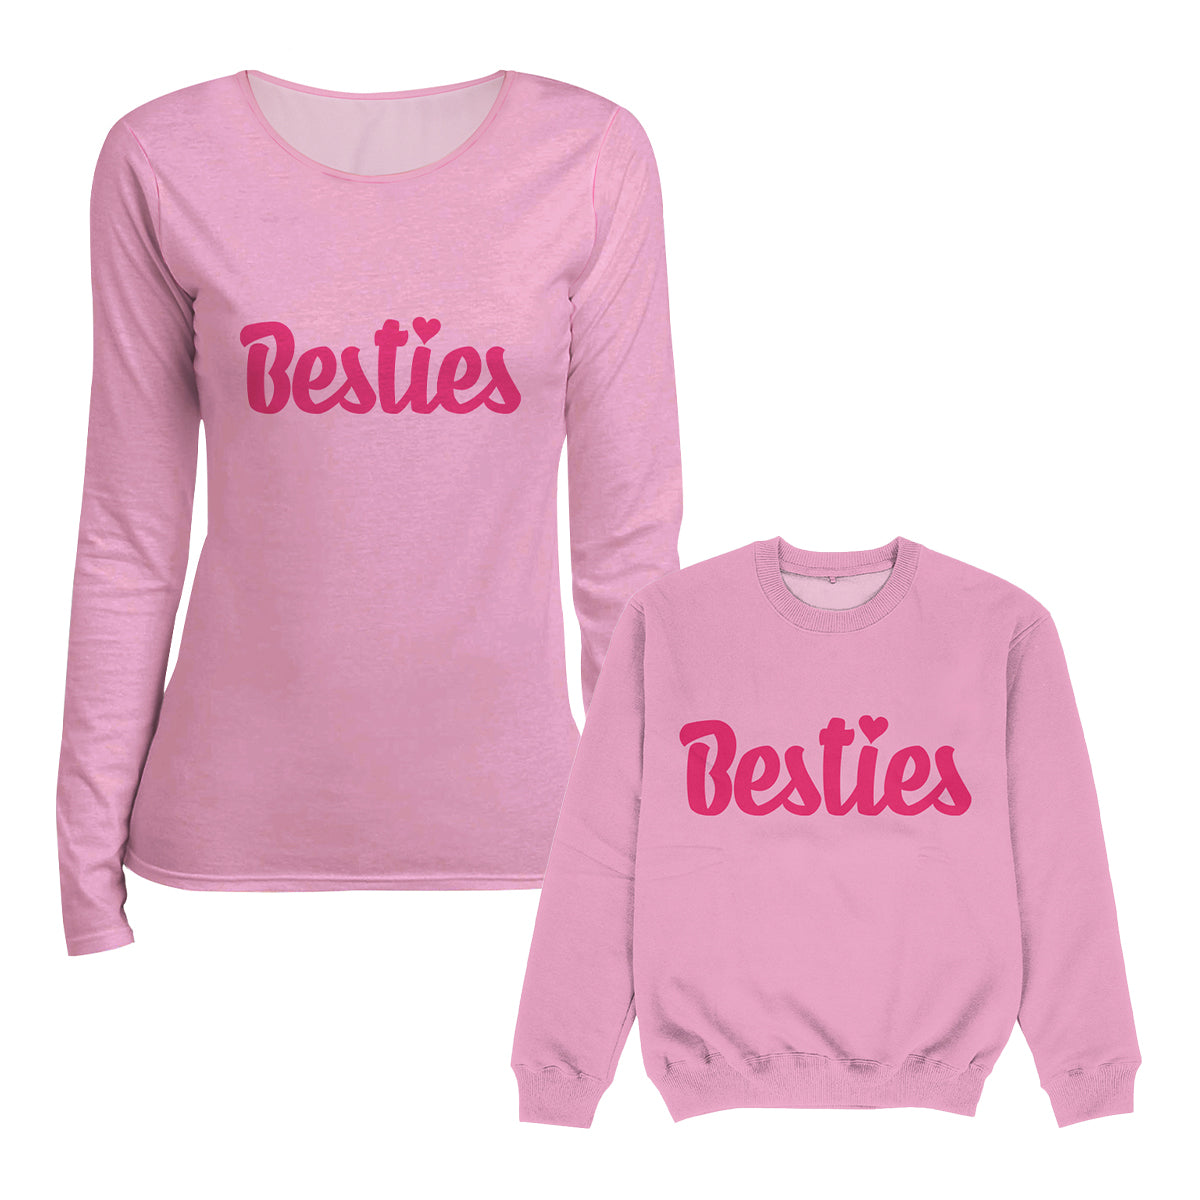 Besties Pink and Hot Pink Long Sleeve Tee Shirt - Wimziy&Co.